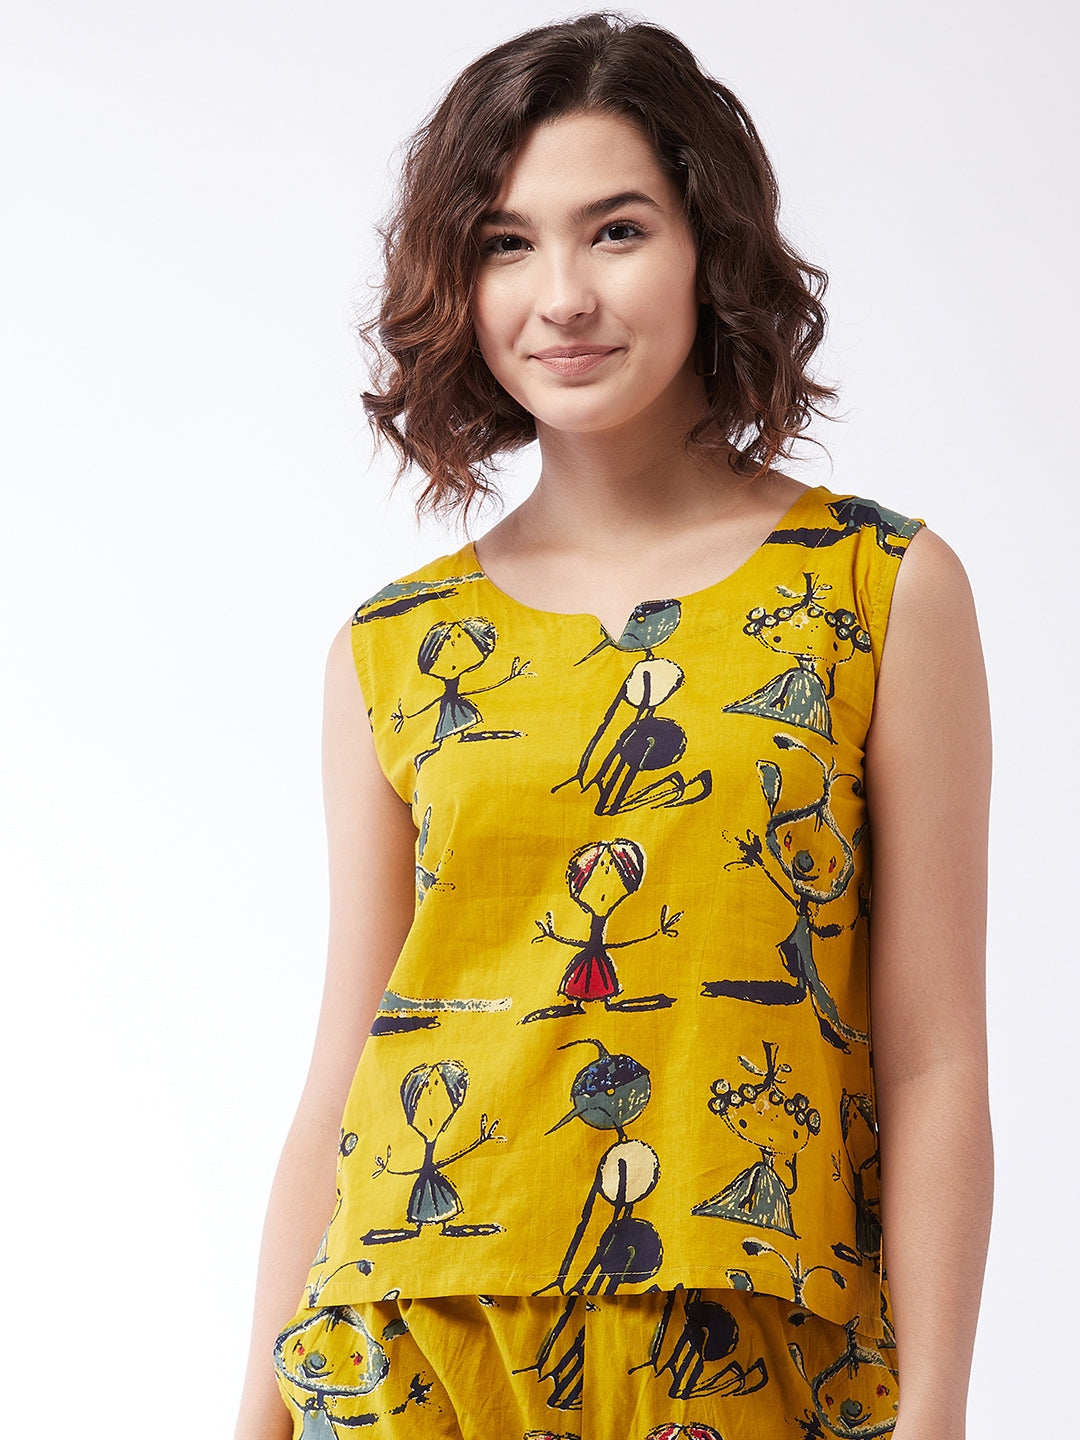 Quirky Top For Teens